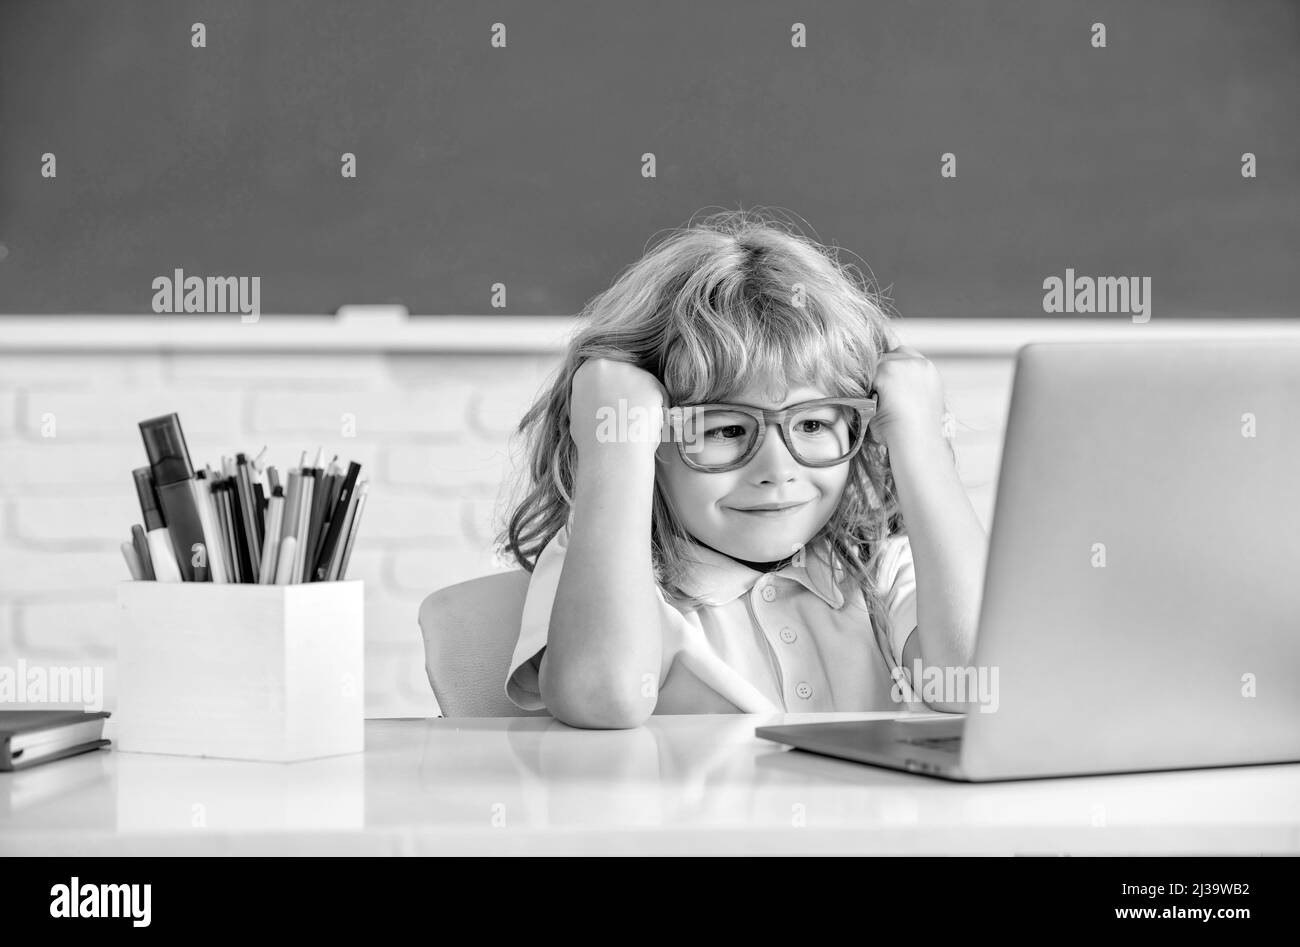 concept of online education. nerd kid in glasses with laptop. september 1. e-learning Stock Photo